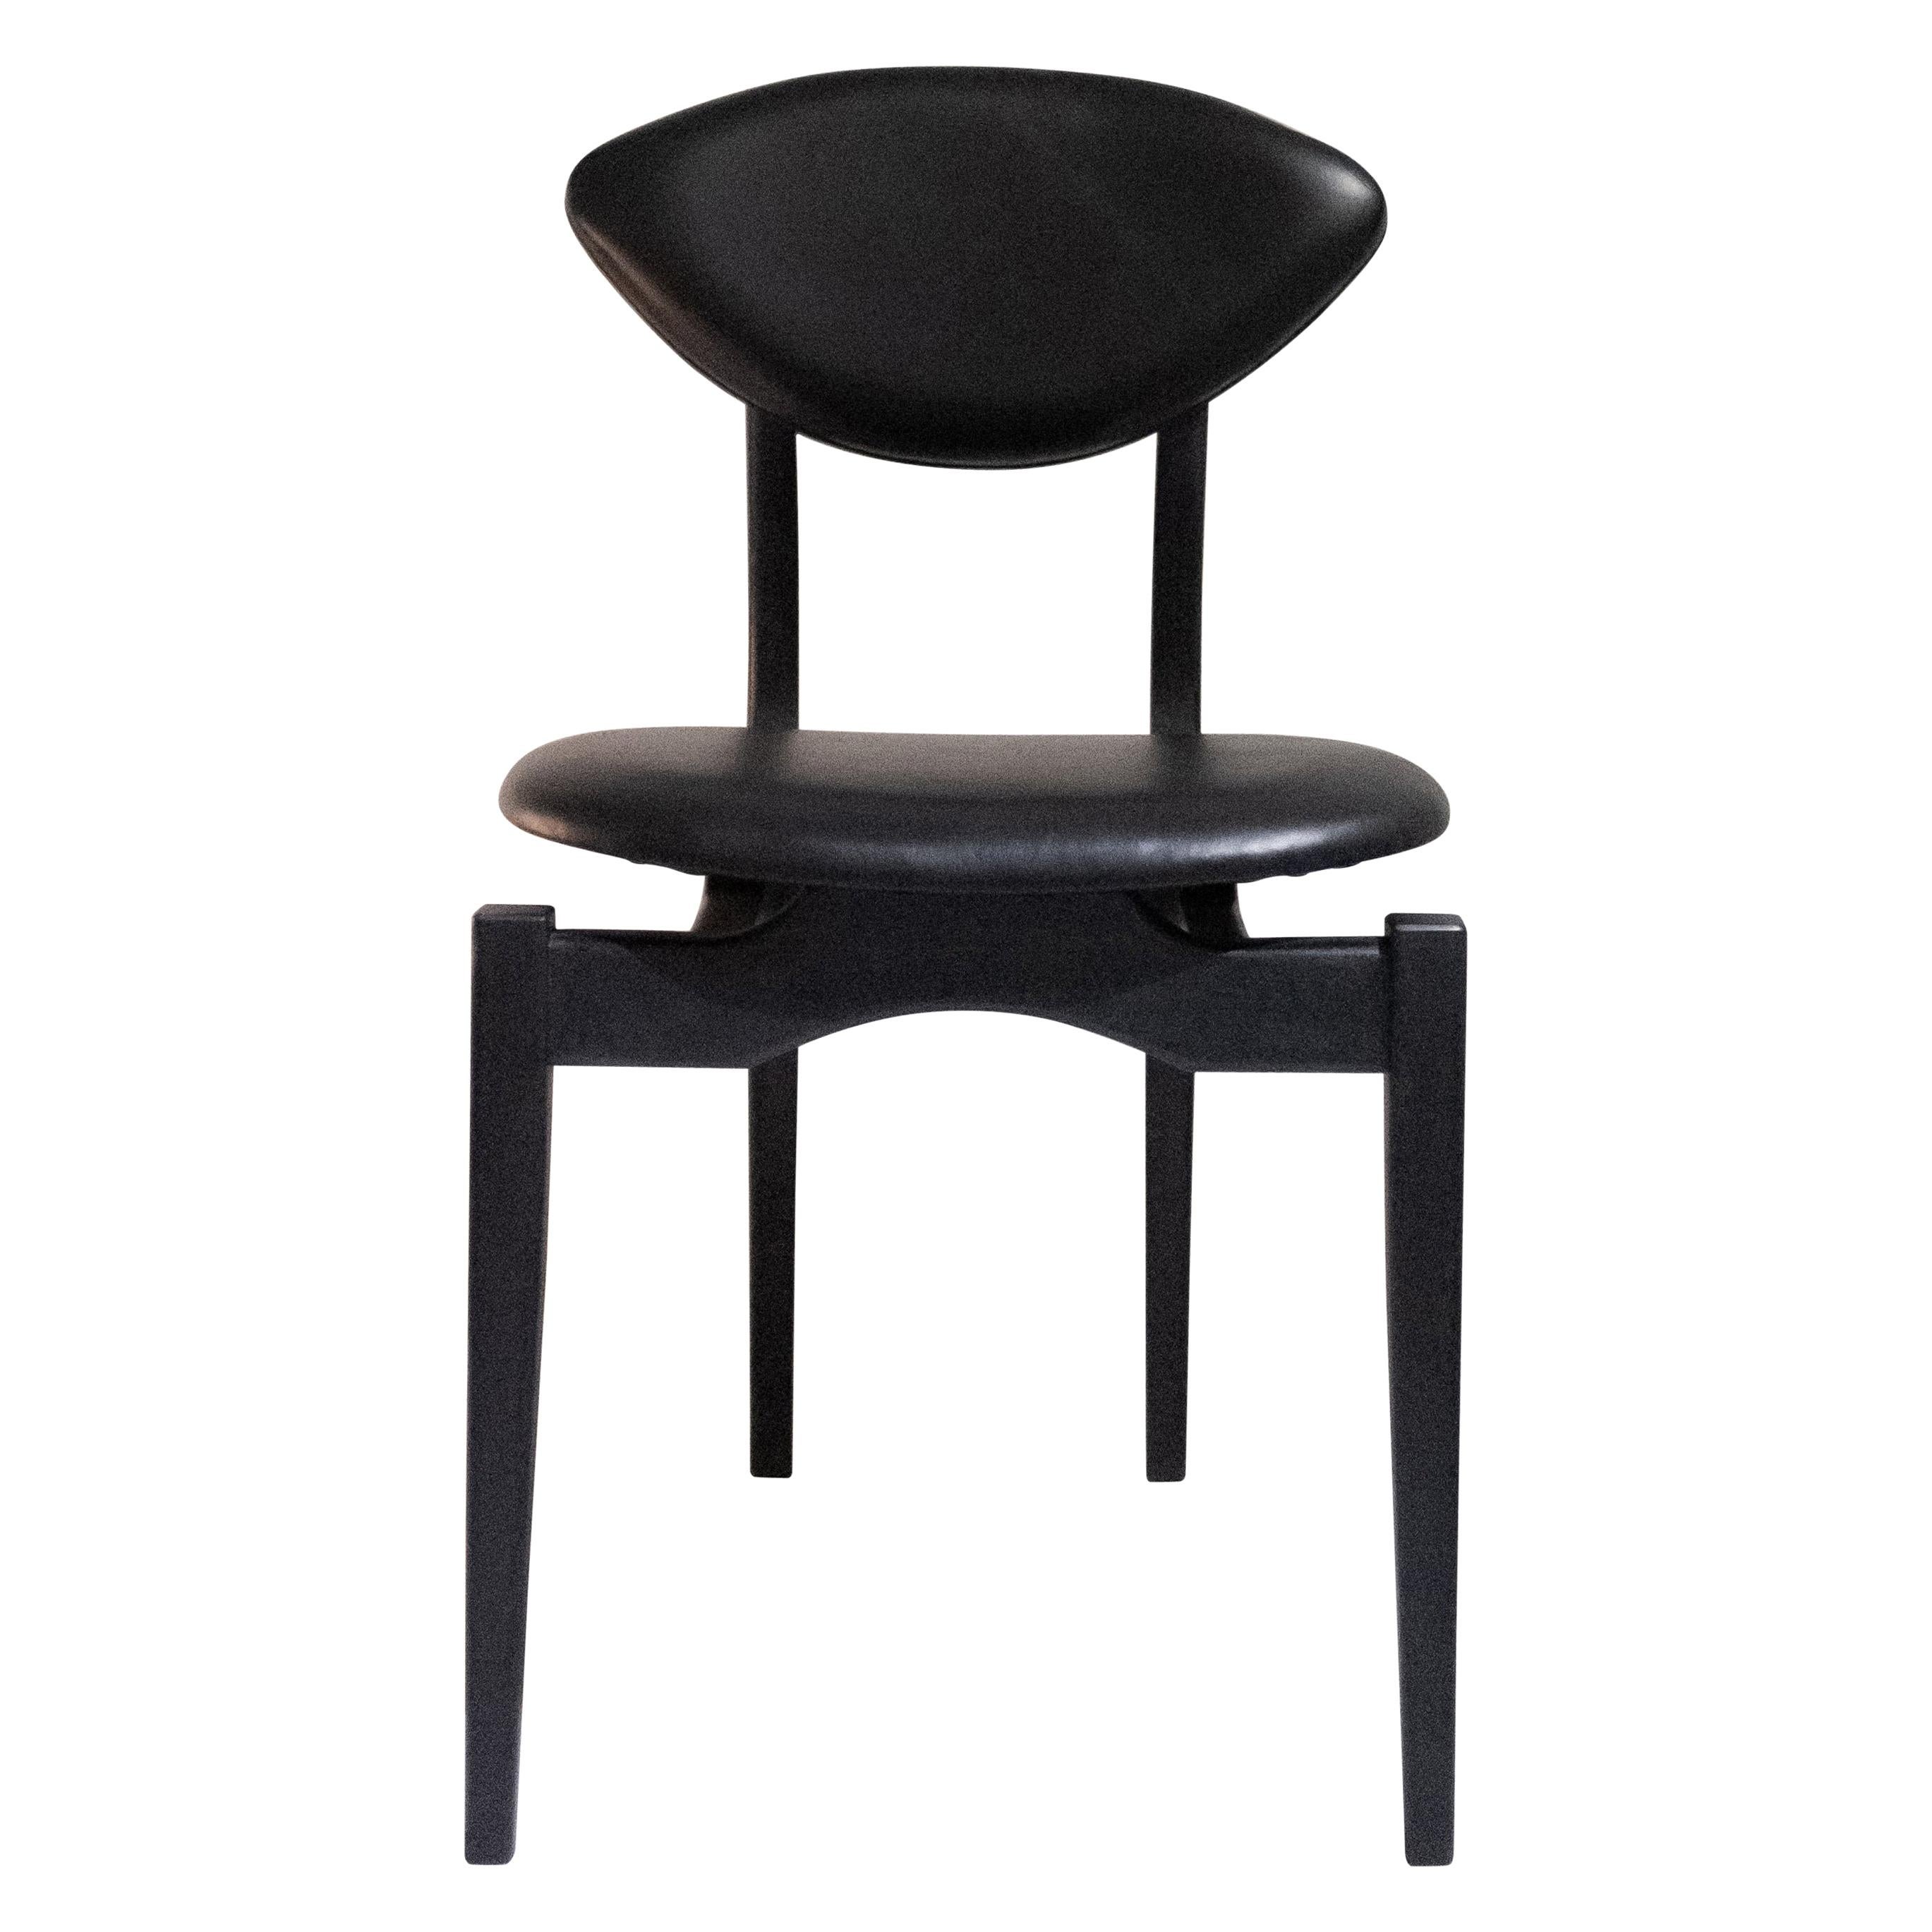 Femur Black Dining Chair in Walnut and Leather 'Set x 6' by Atra For Sale